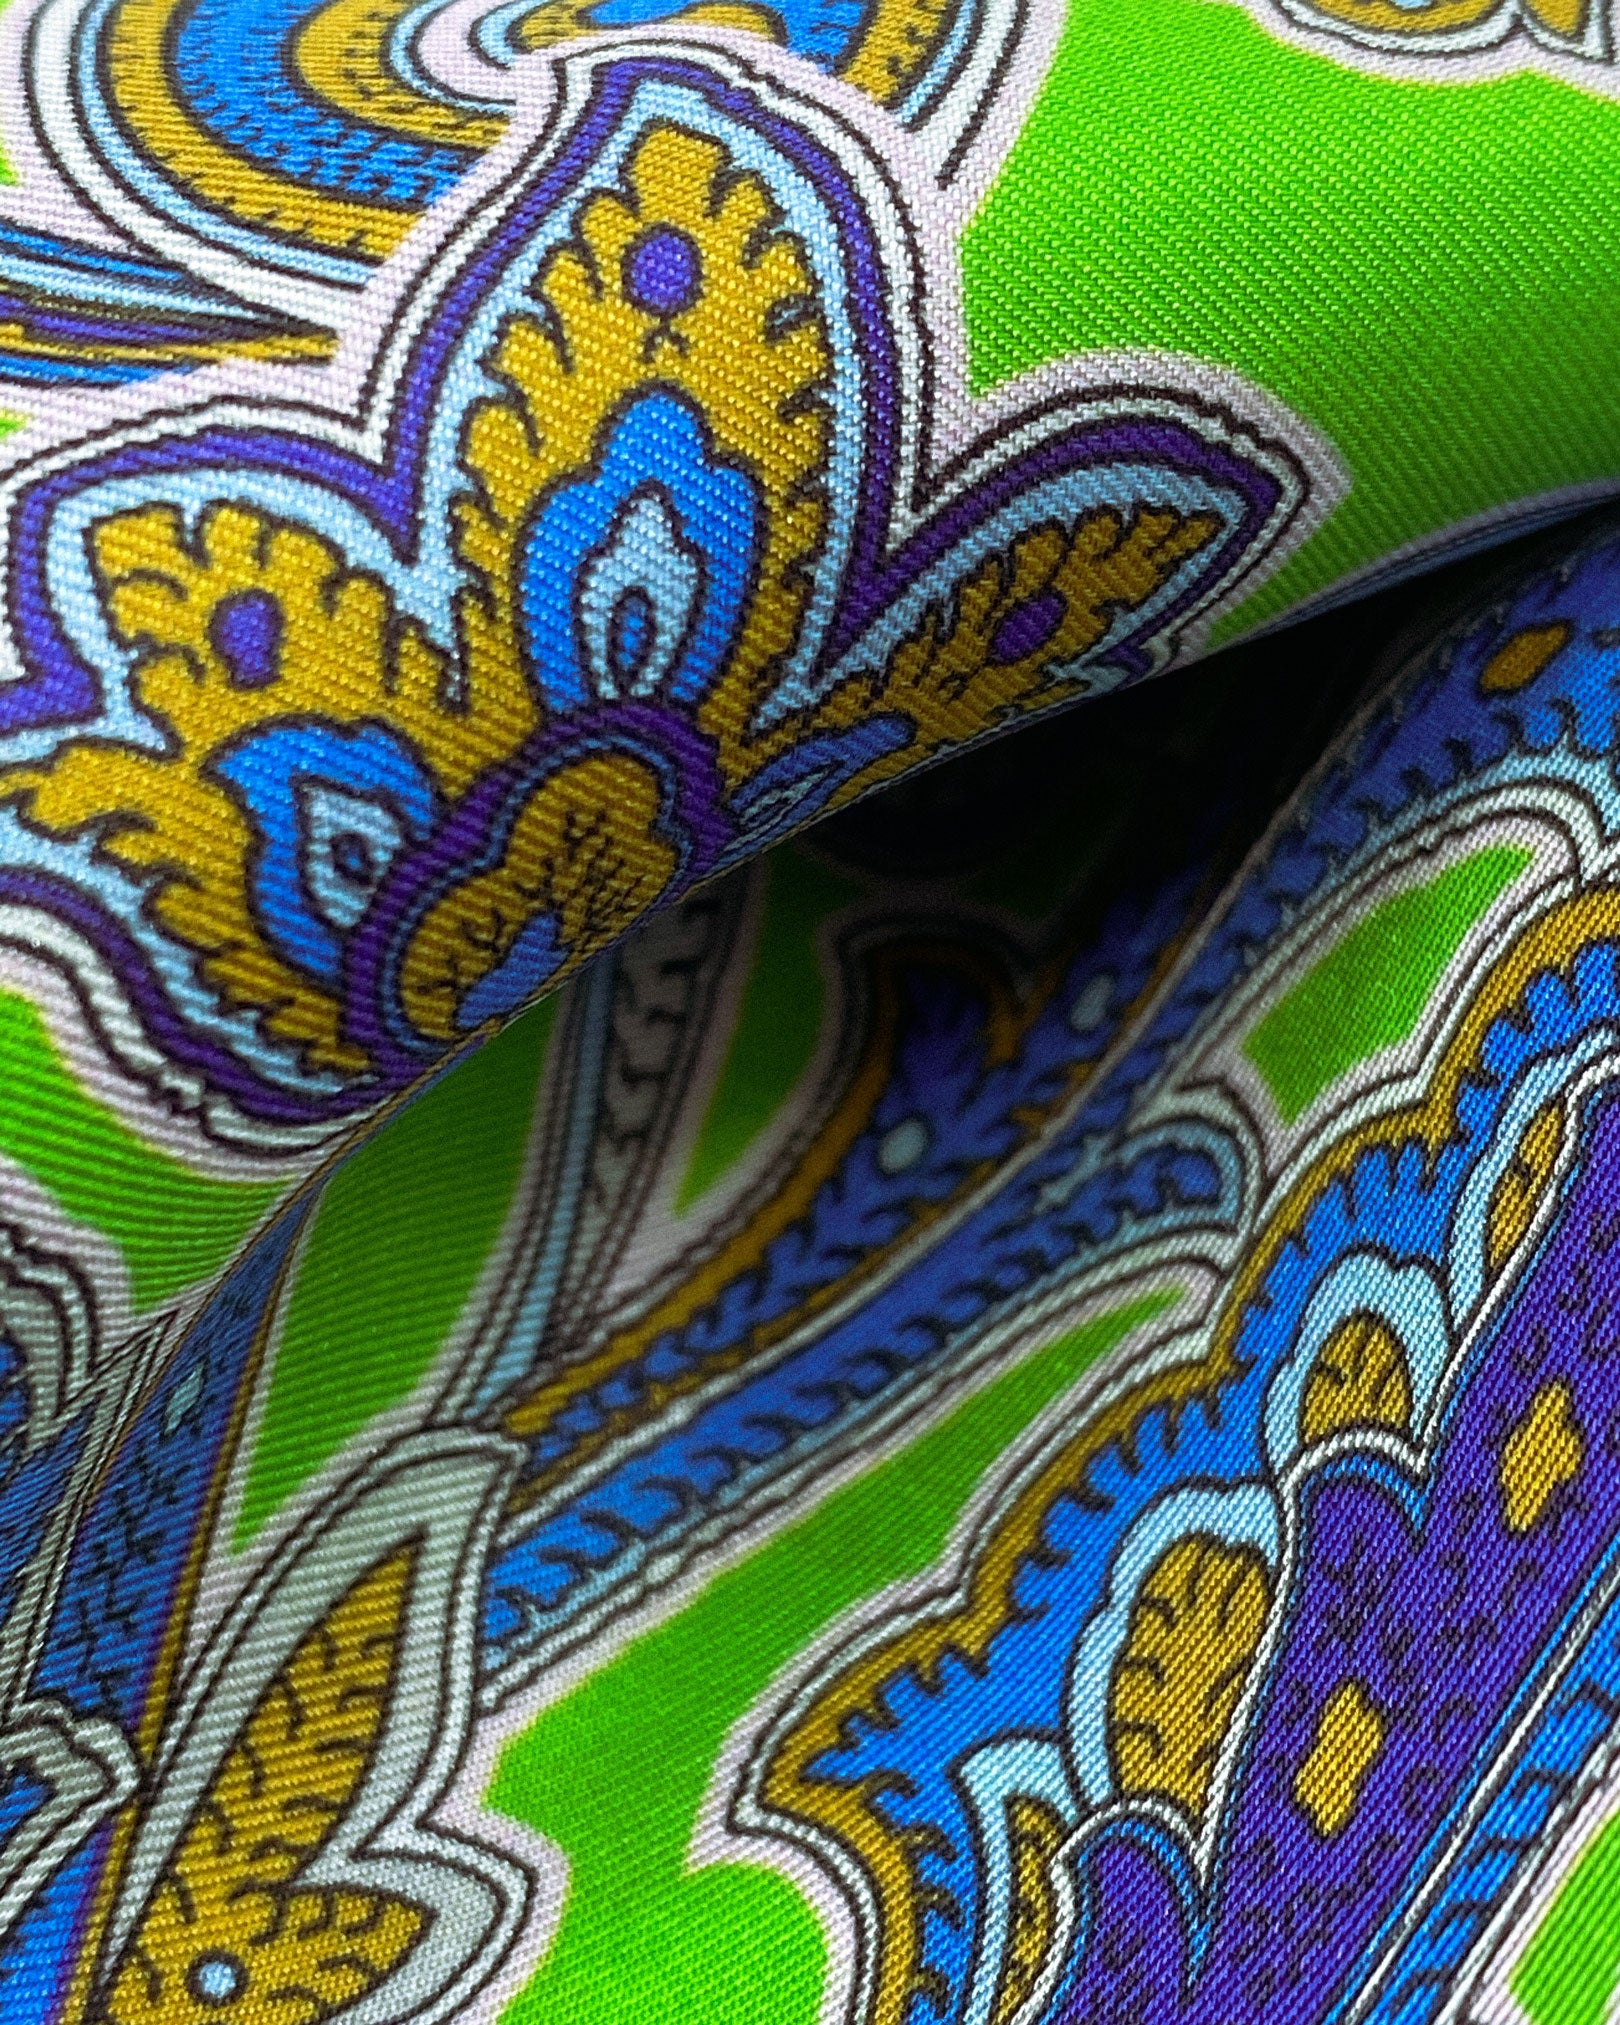 Ruffled close-up view of the 'Daytona' silk aviator scarf, presenting a closer view of the blue paisley swirls and floral symbols on a bright green background.